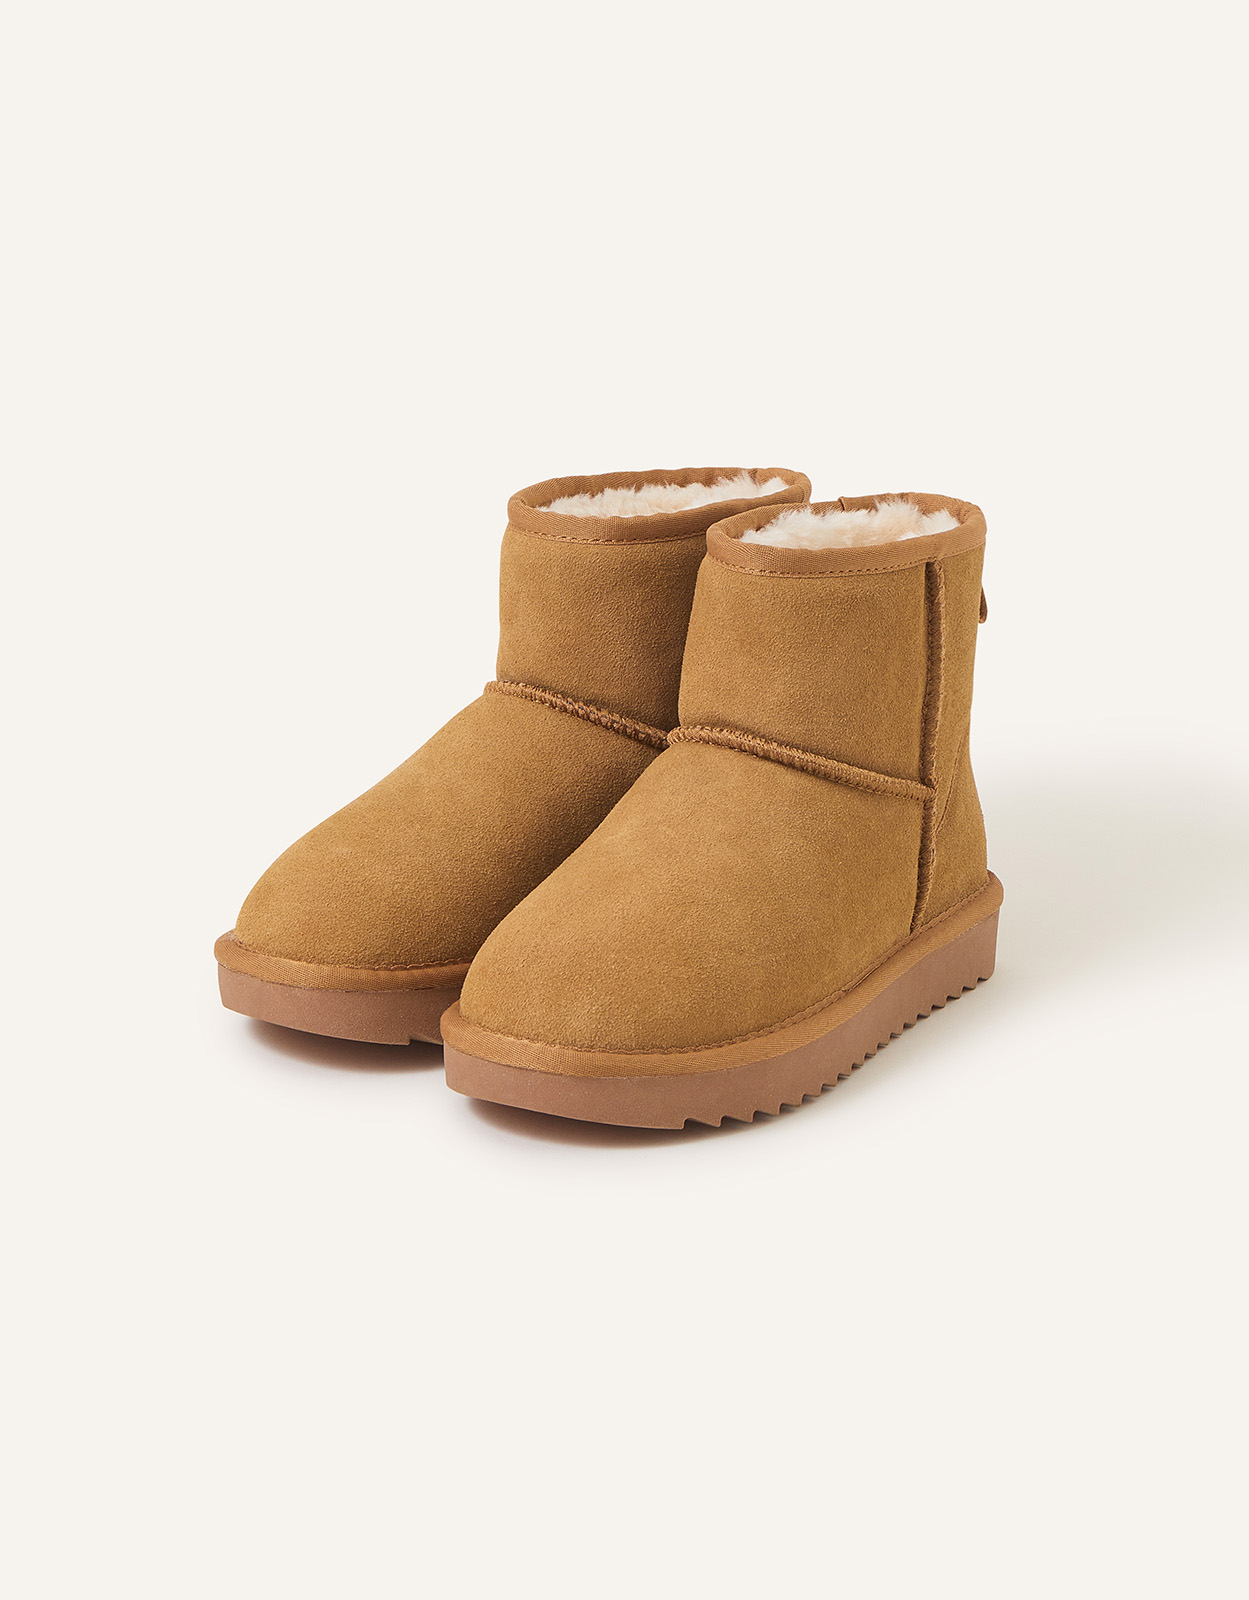 Accessorize Mid Suede Boots Tan, Size: 40